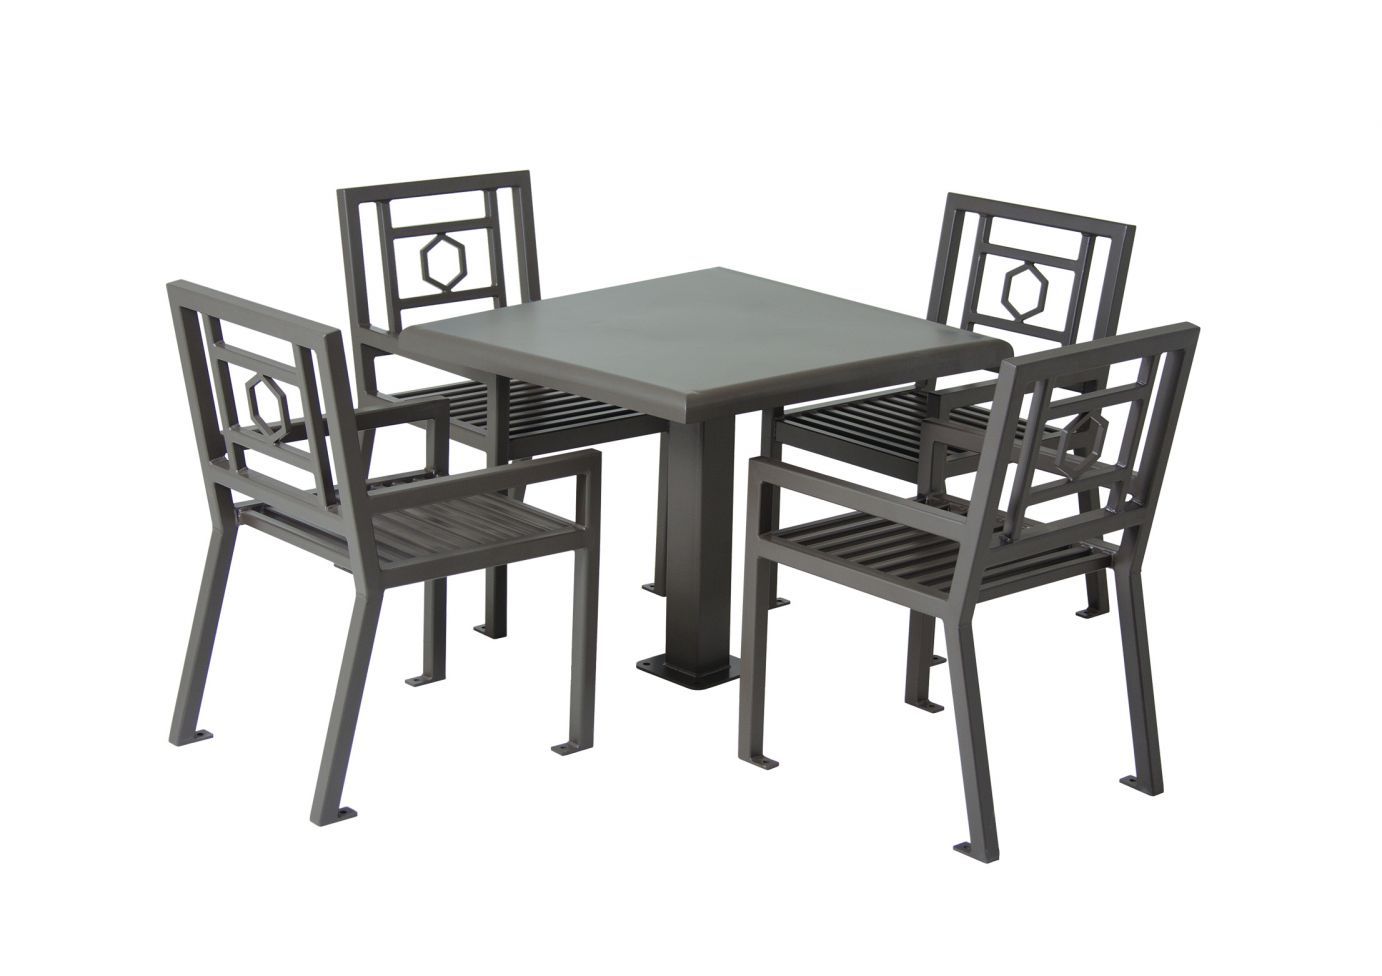 36" Square Huntington Table with 4 Chairs | WillyGoat Playground & Park Equipment